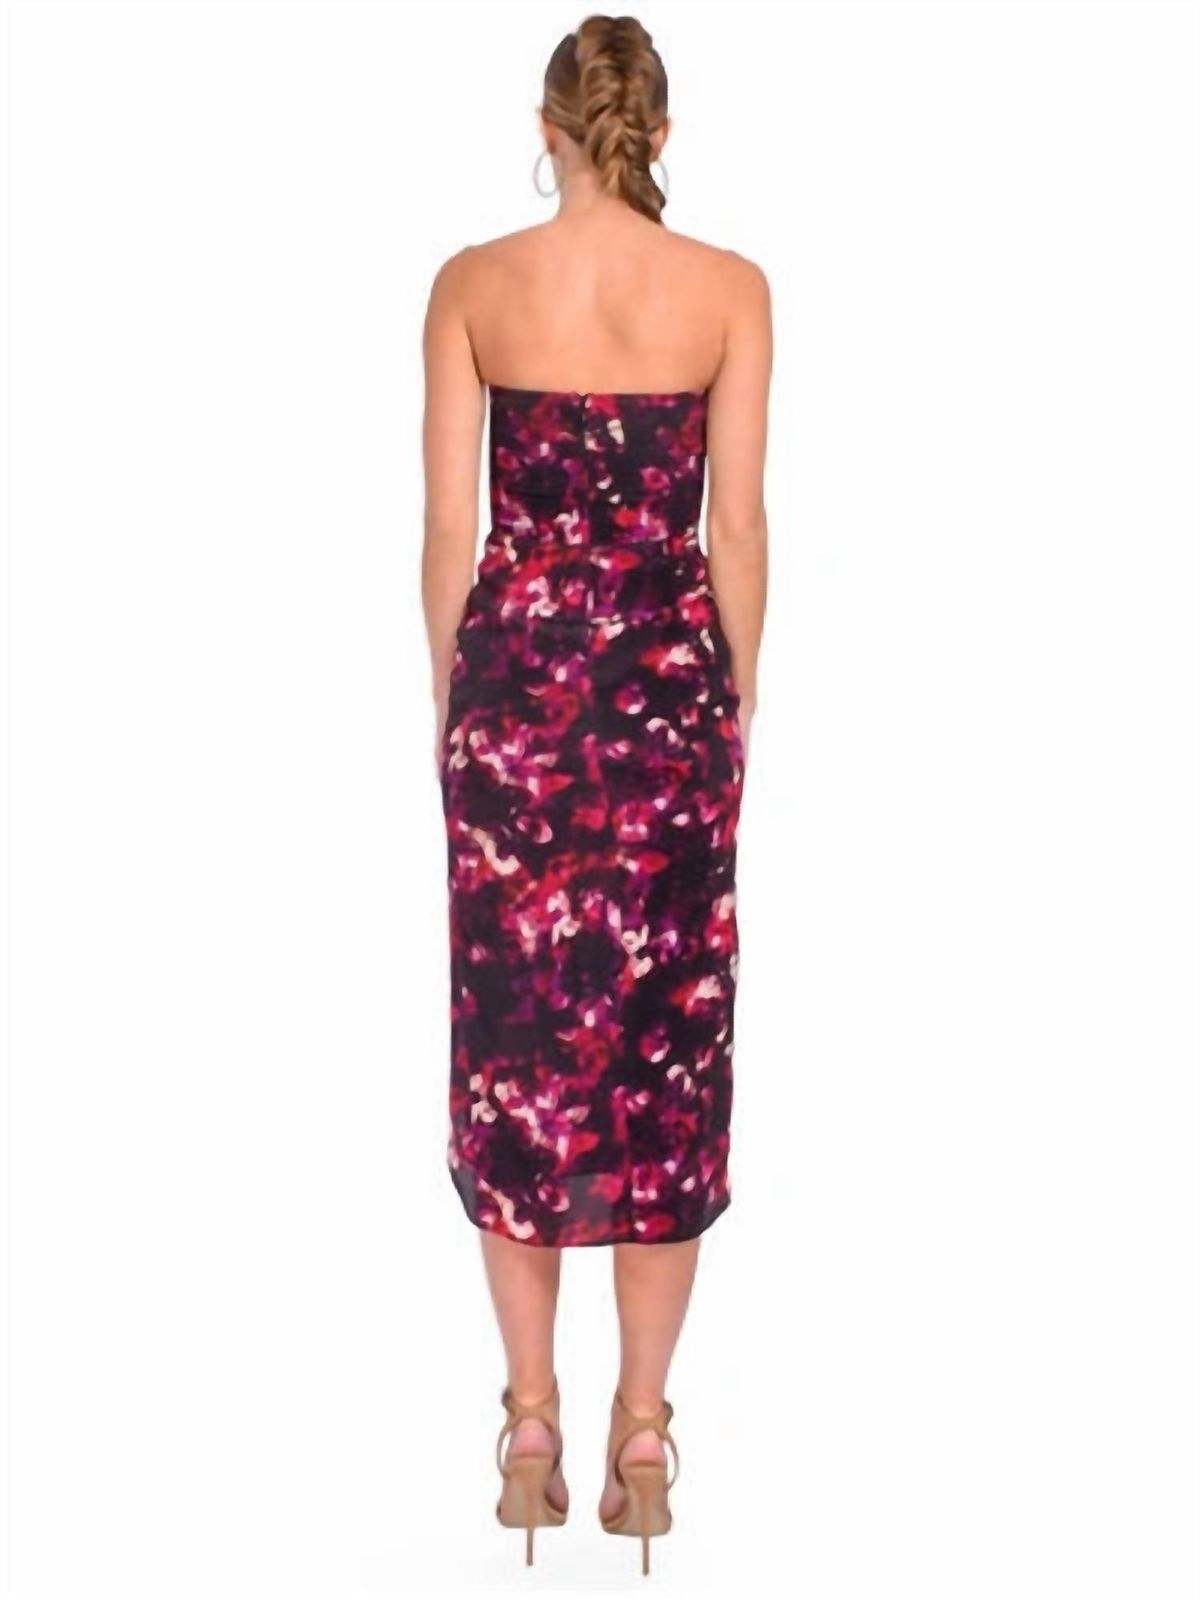 Style 1-2279318997-2901 GILNER FARRAR Size M Strapless Floral Pink Cocktail Dress on Queenly